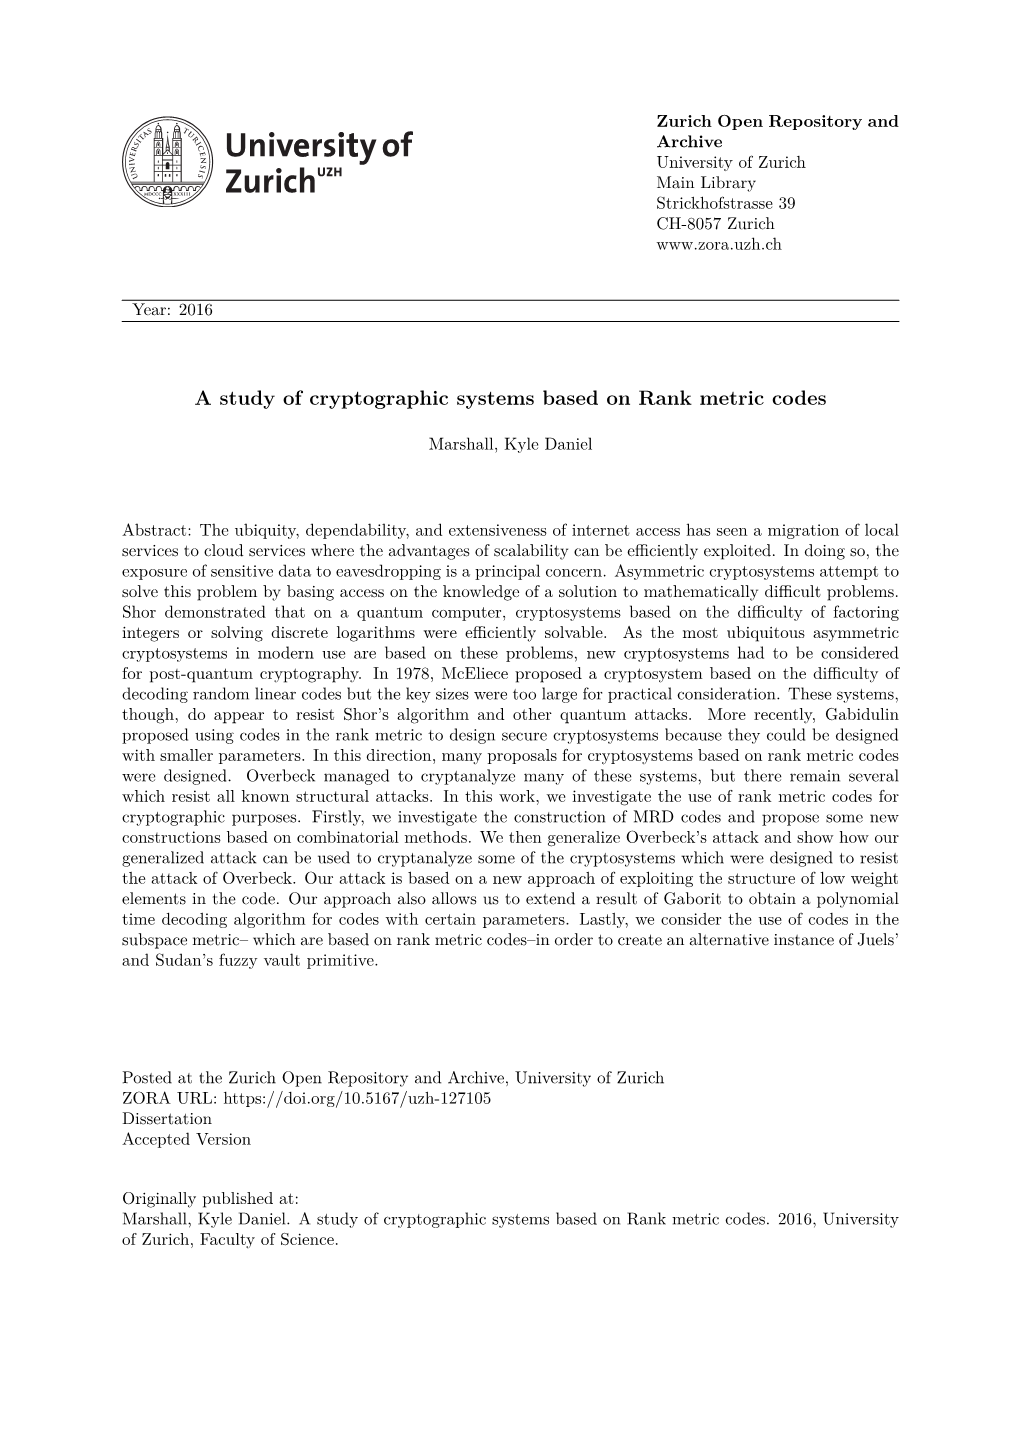 'A Study of Cryptographic Systems Based on Rank Metric Codes'